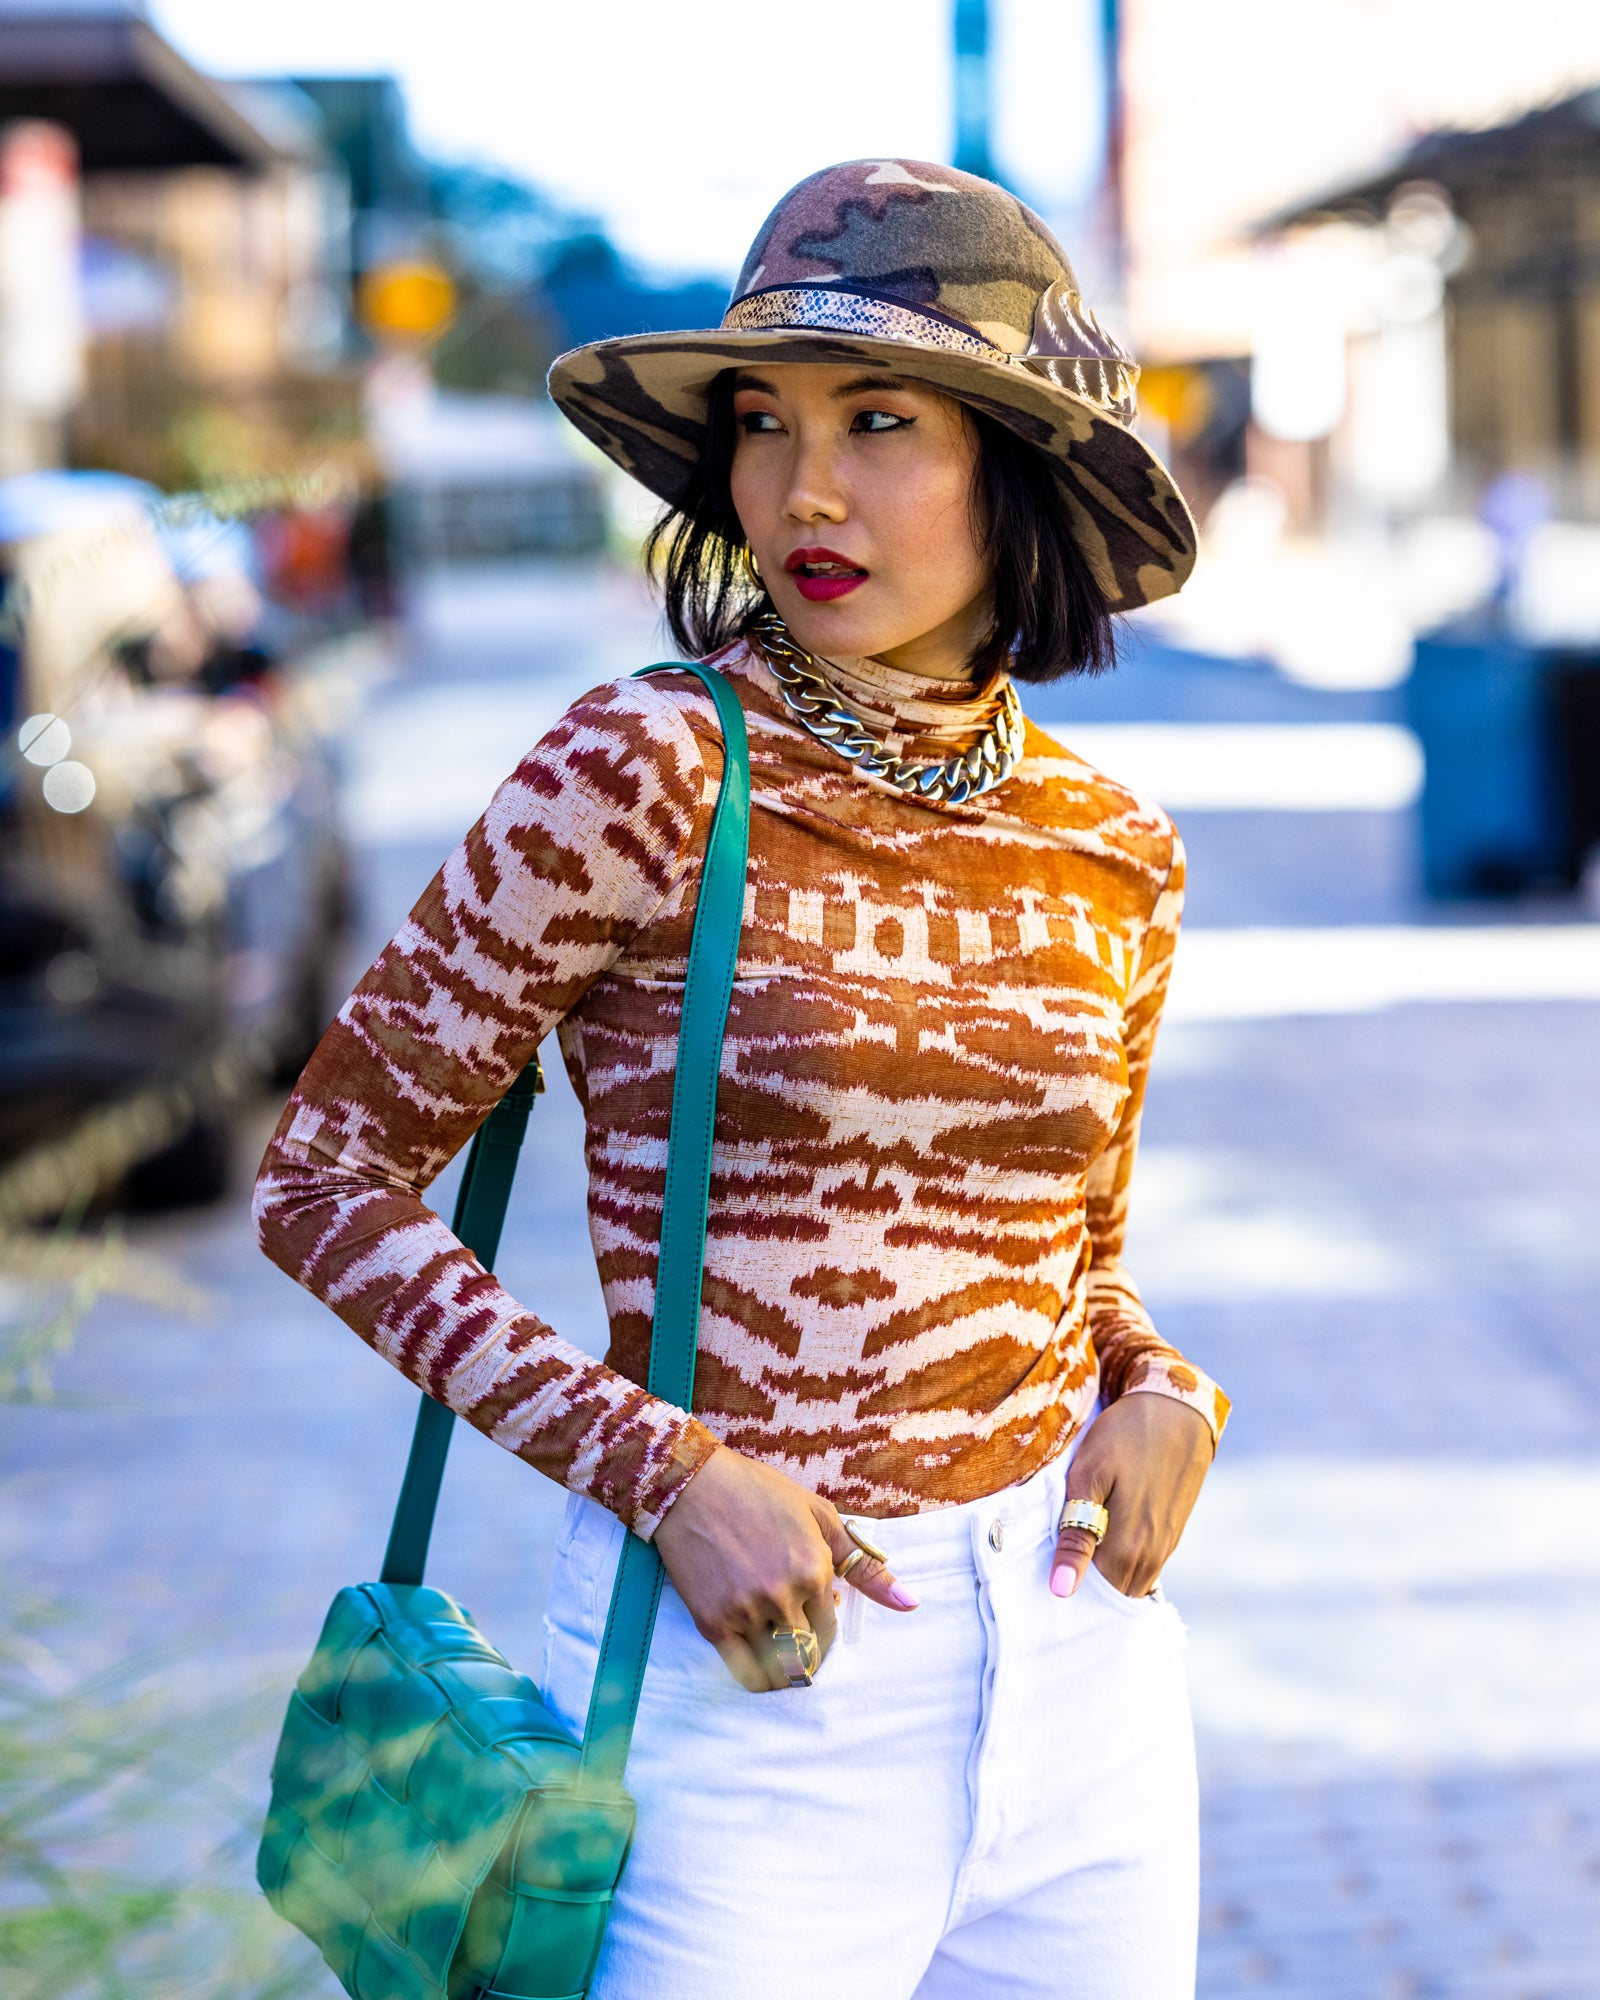 Nanphanita Jacob wearing a hat from Cha Cha's House of Ill Repute, a hat shop for women in NYC